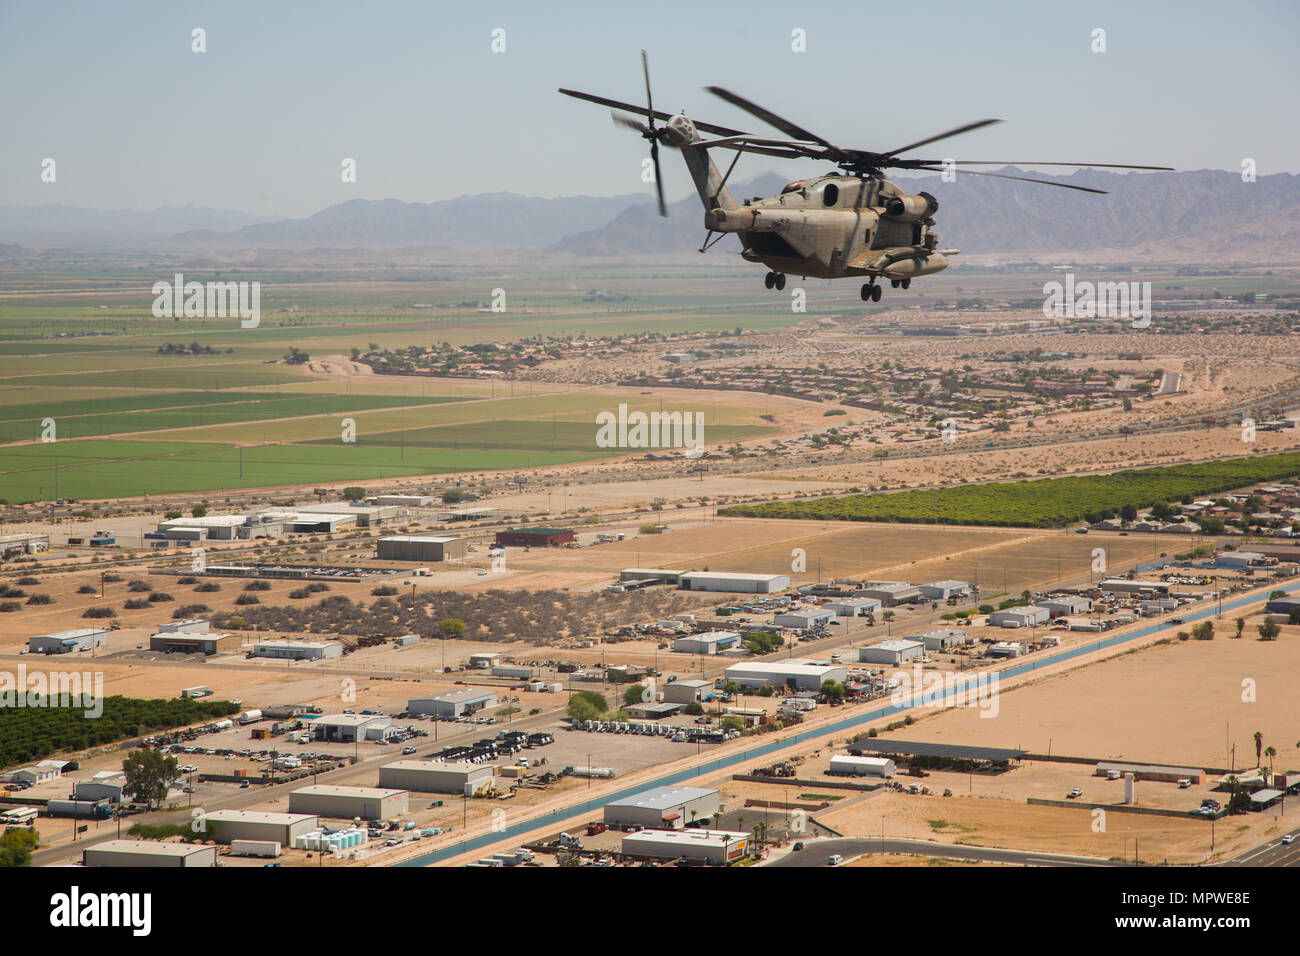 A CH-53E Super Stallion assigned to Marine Heavy Helicopter Squadron (HMH) 466 flies over Yuma, Ariz. in formation while transporting Marines during an exercise in part of Weapons and Tactics Instructors course (WTI) 2-17 near Yuma, Ariz., April 20, 2017. WTI is held biannually at Marine Corps Air Station (MCAS) Yuma, Ariz., to provide students with detailed training on the various ranges in Arizona and California. (U.S. Marine Corps photo by Cpl. Trever A. Statz/Released) Stock Photo